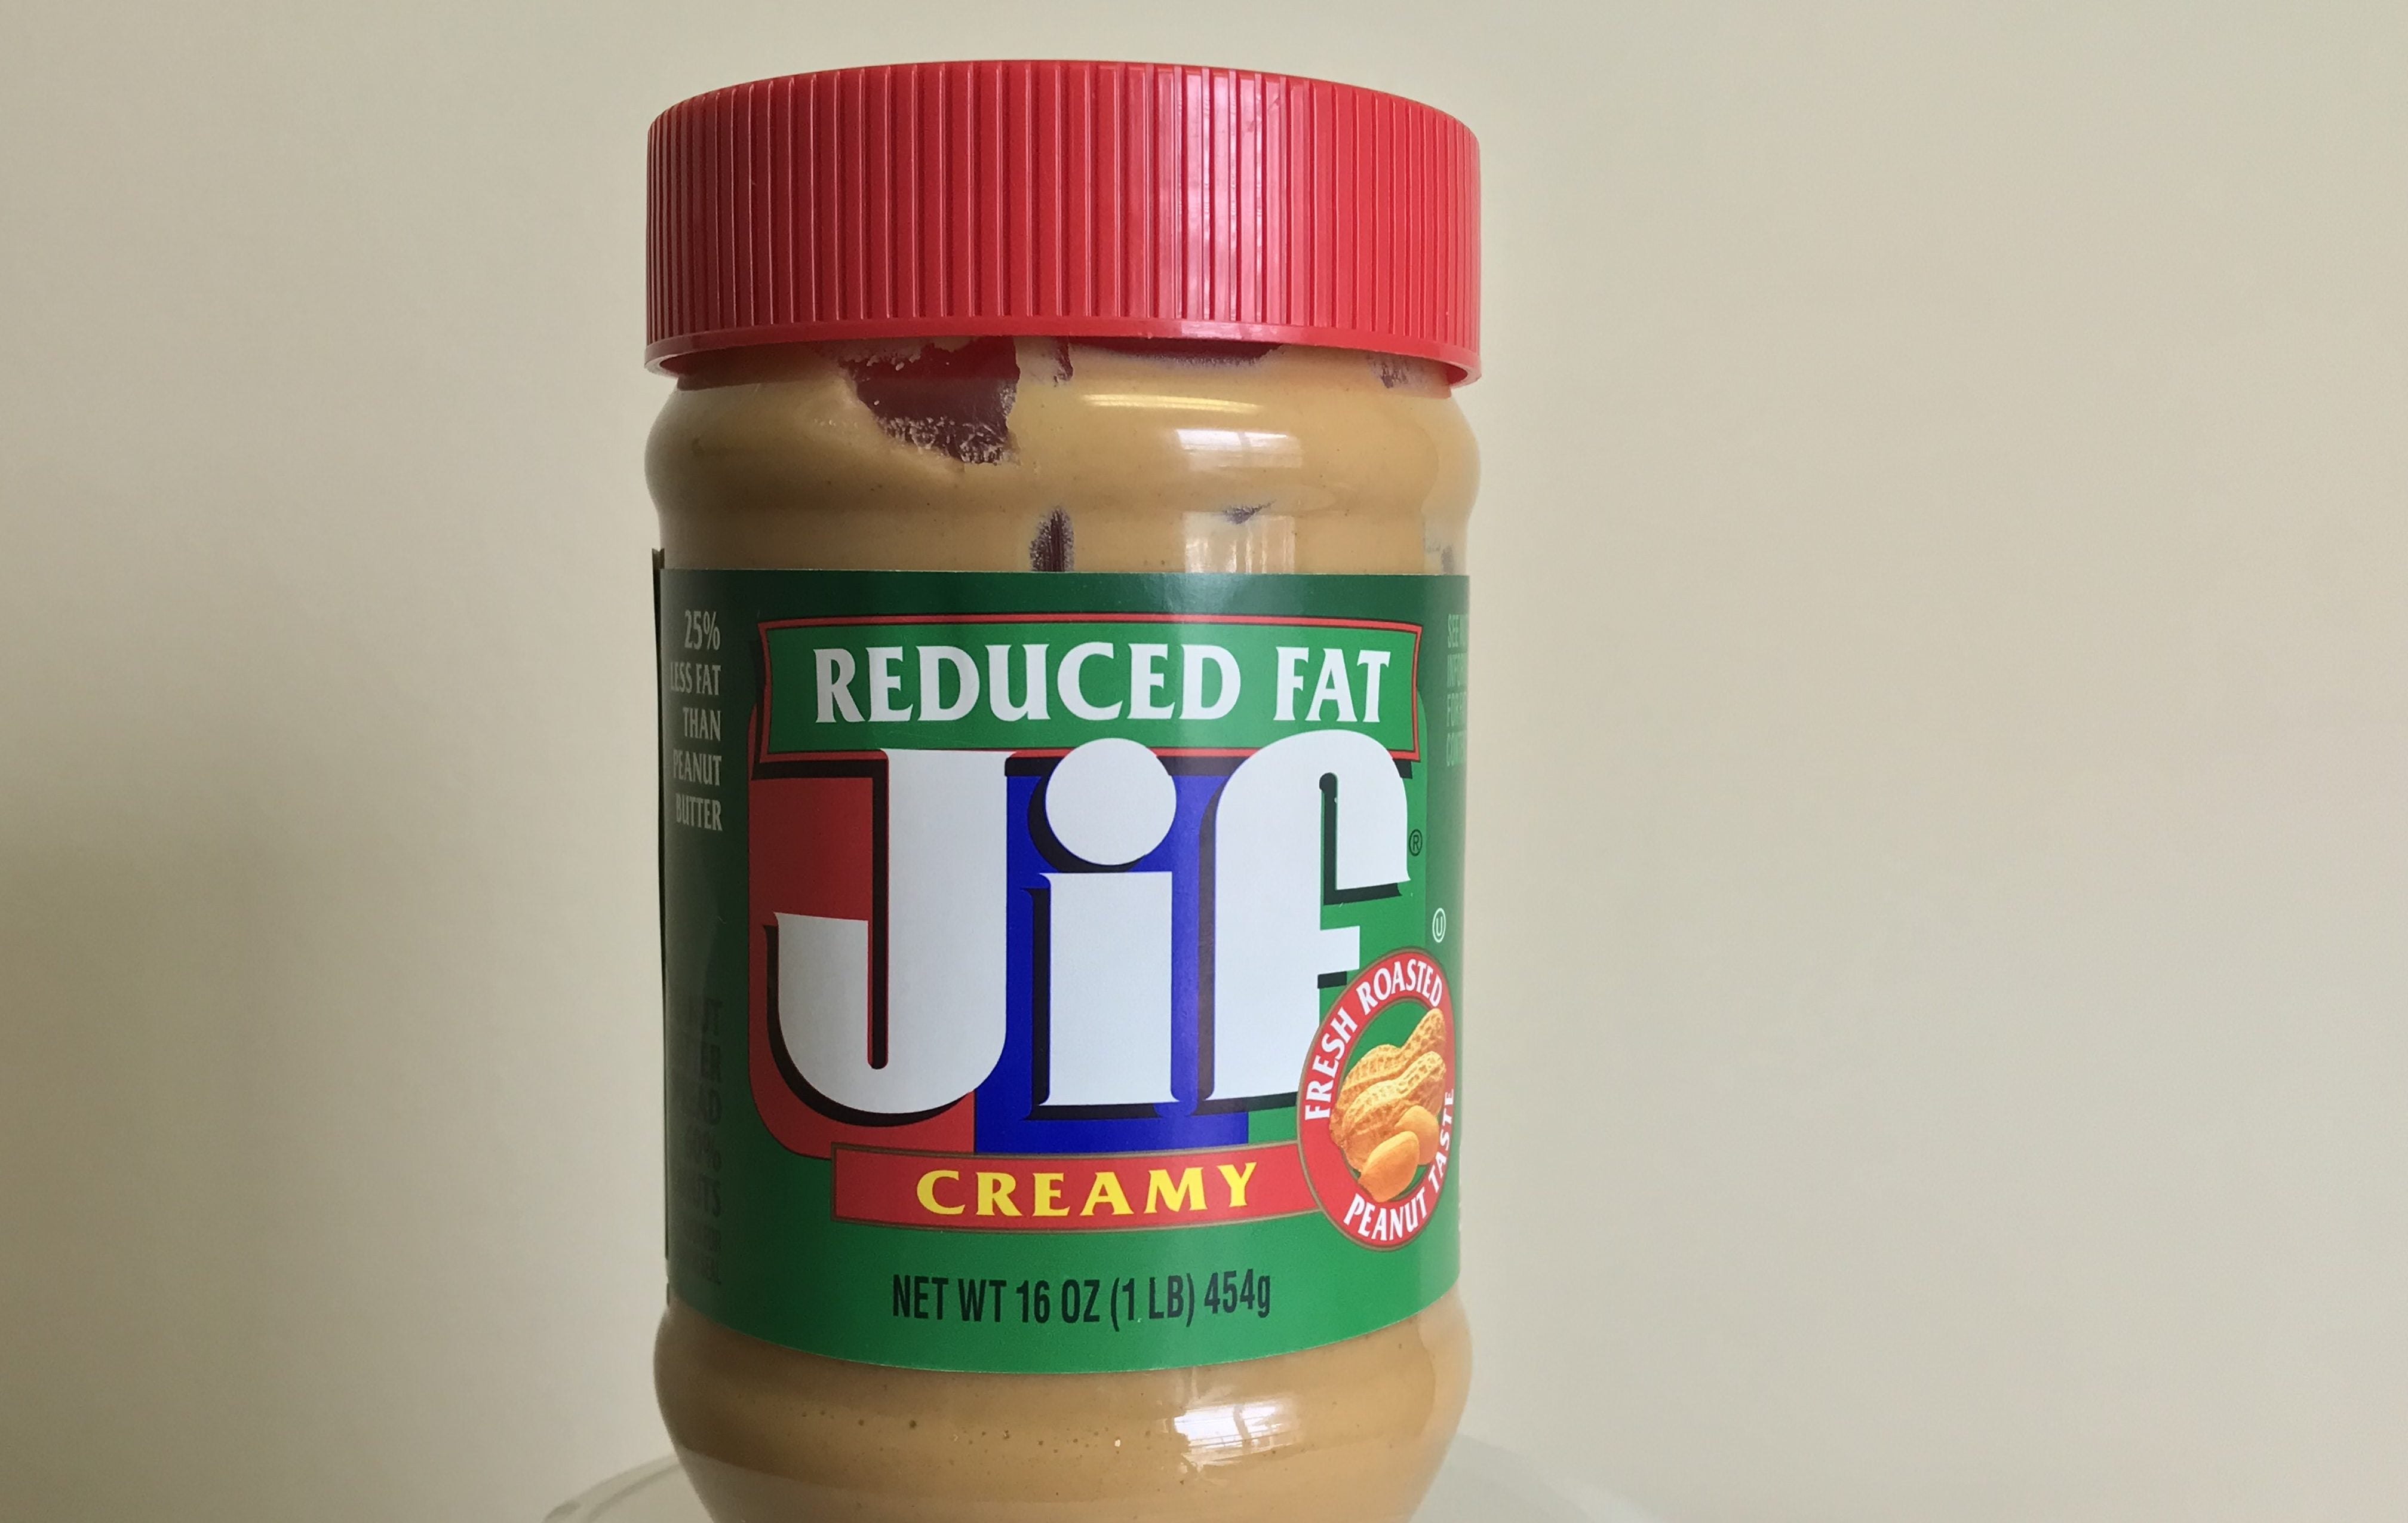 list-of-recalled-jif-peanut-butter-products-has-expanded-the-interior-journal-the-interior